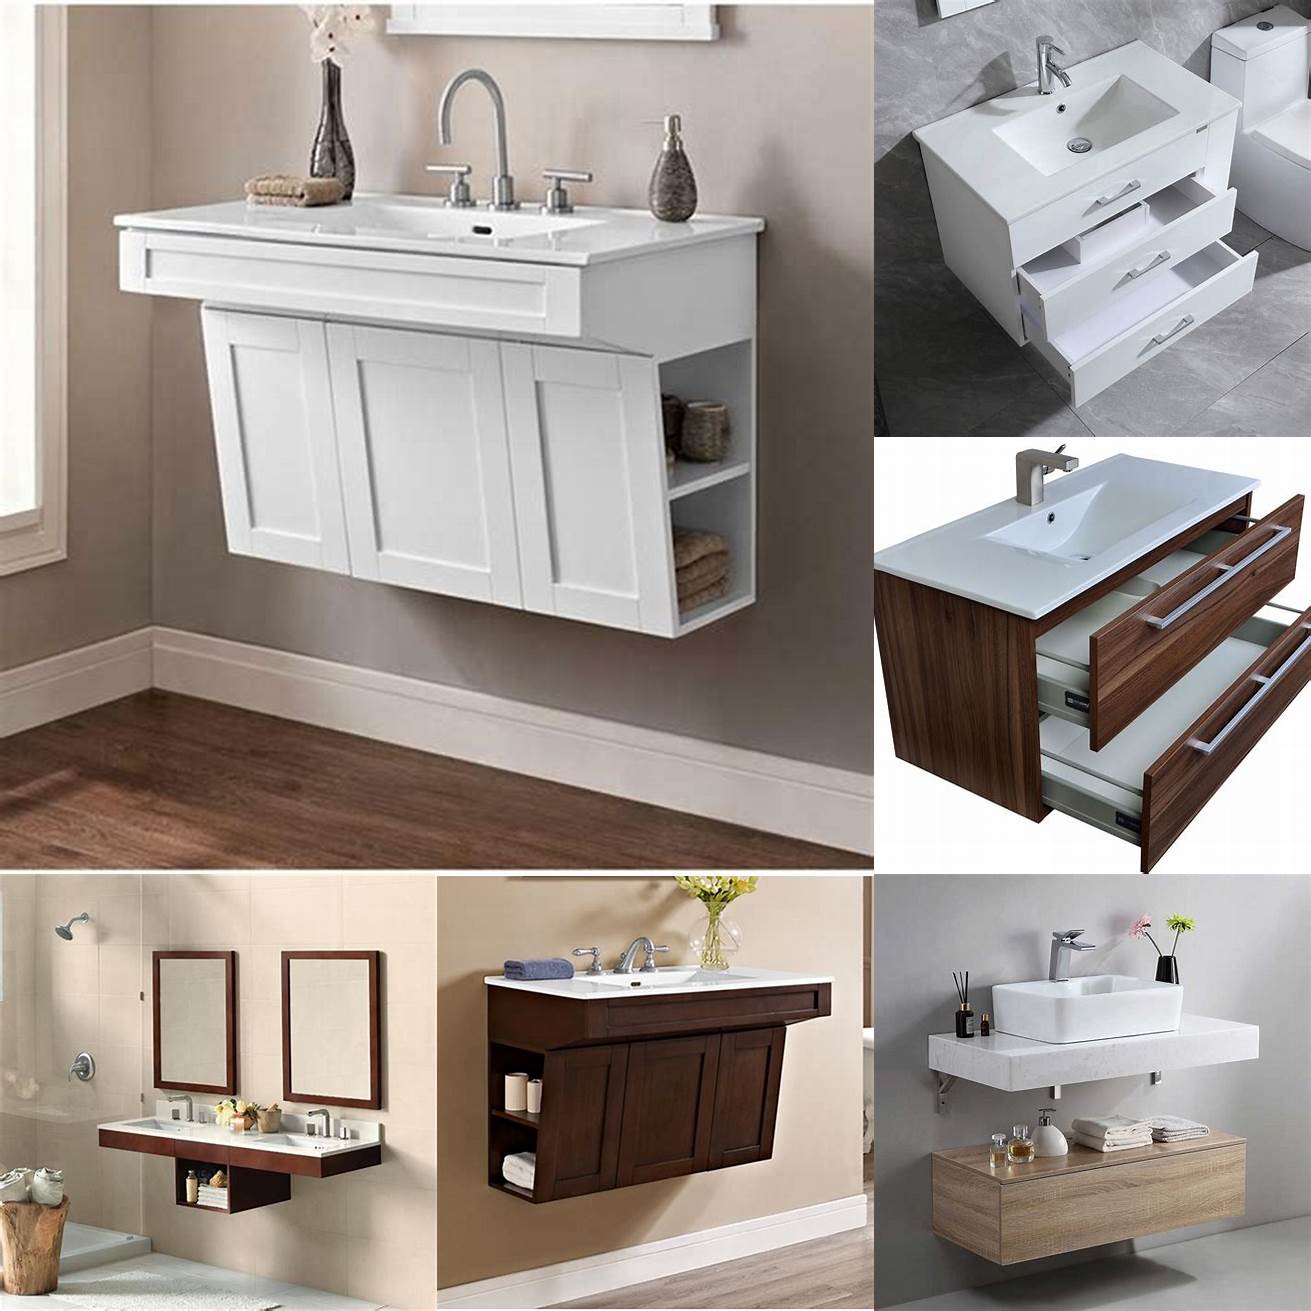 Space-saving Wall mounted vanities take up less floor space making them ideal for smaller bathrooms